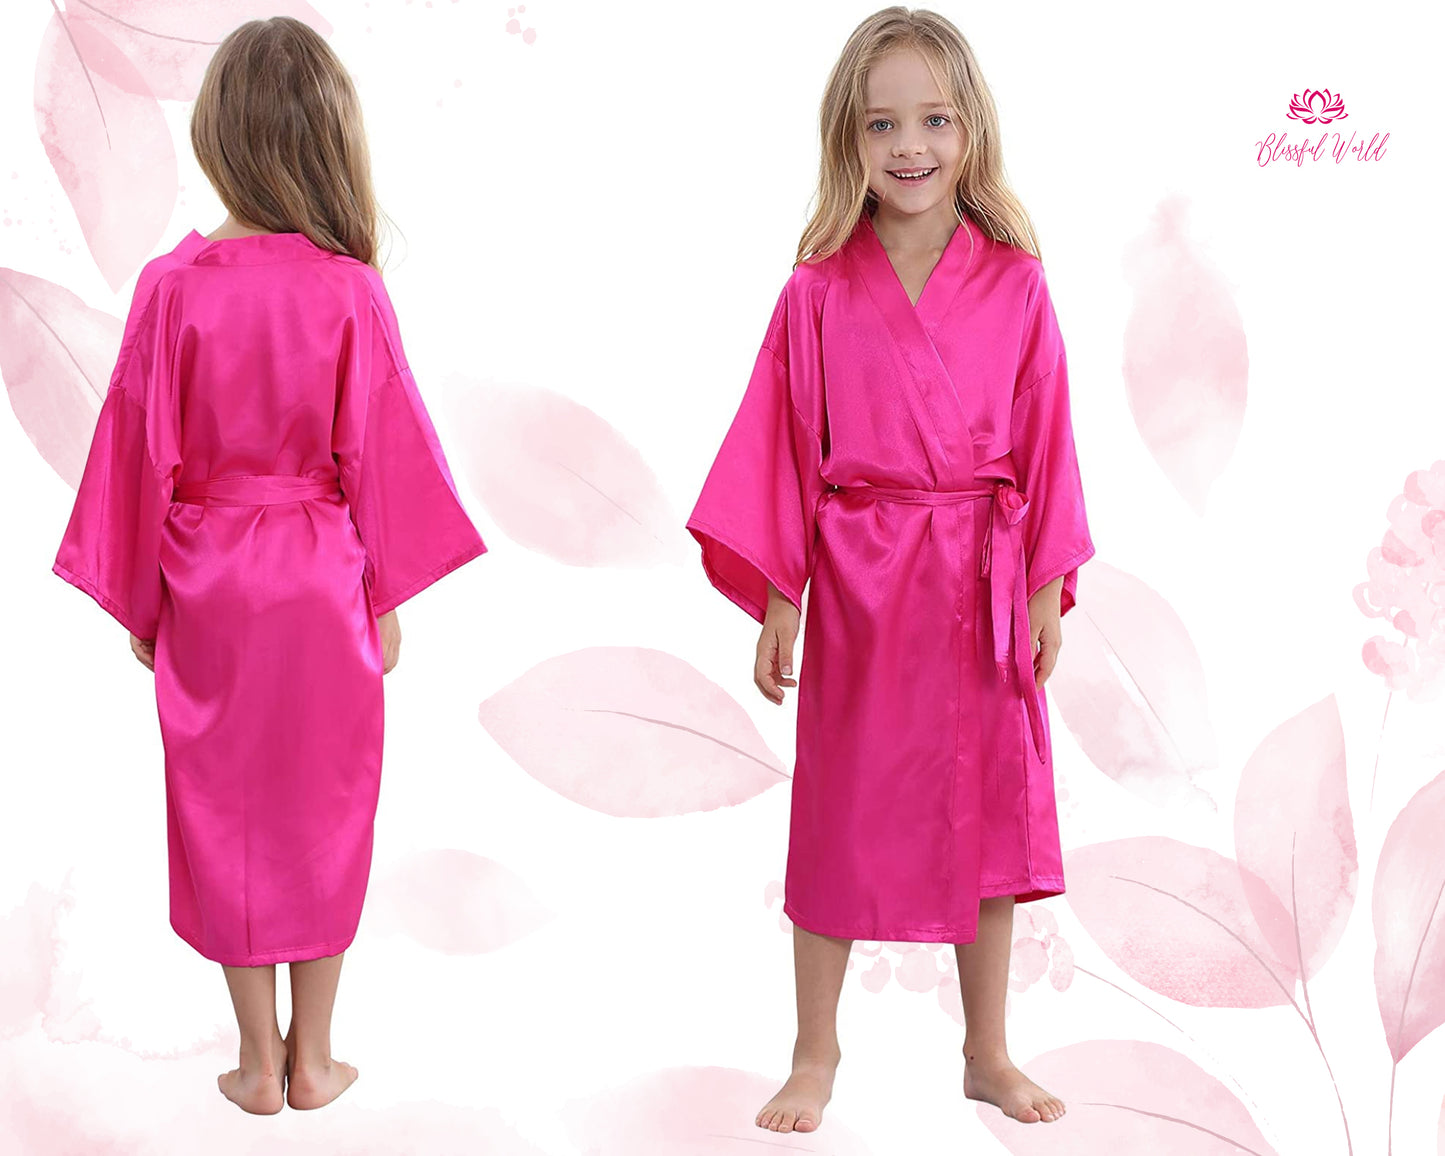 Custom Kids Robes Flower Girl Robes Satin Robes Personalized Robes Bridal Robes Customized Kimono Robes Gift For Her Wedding Gift